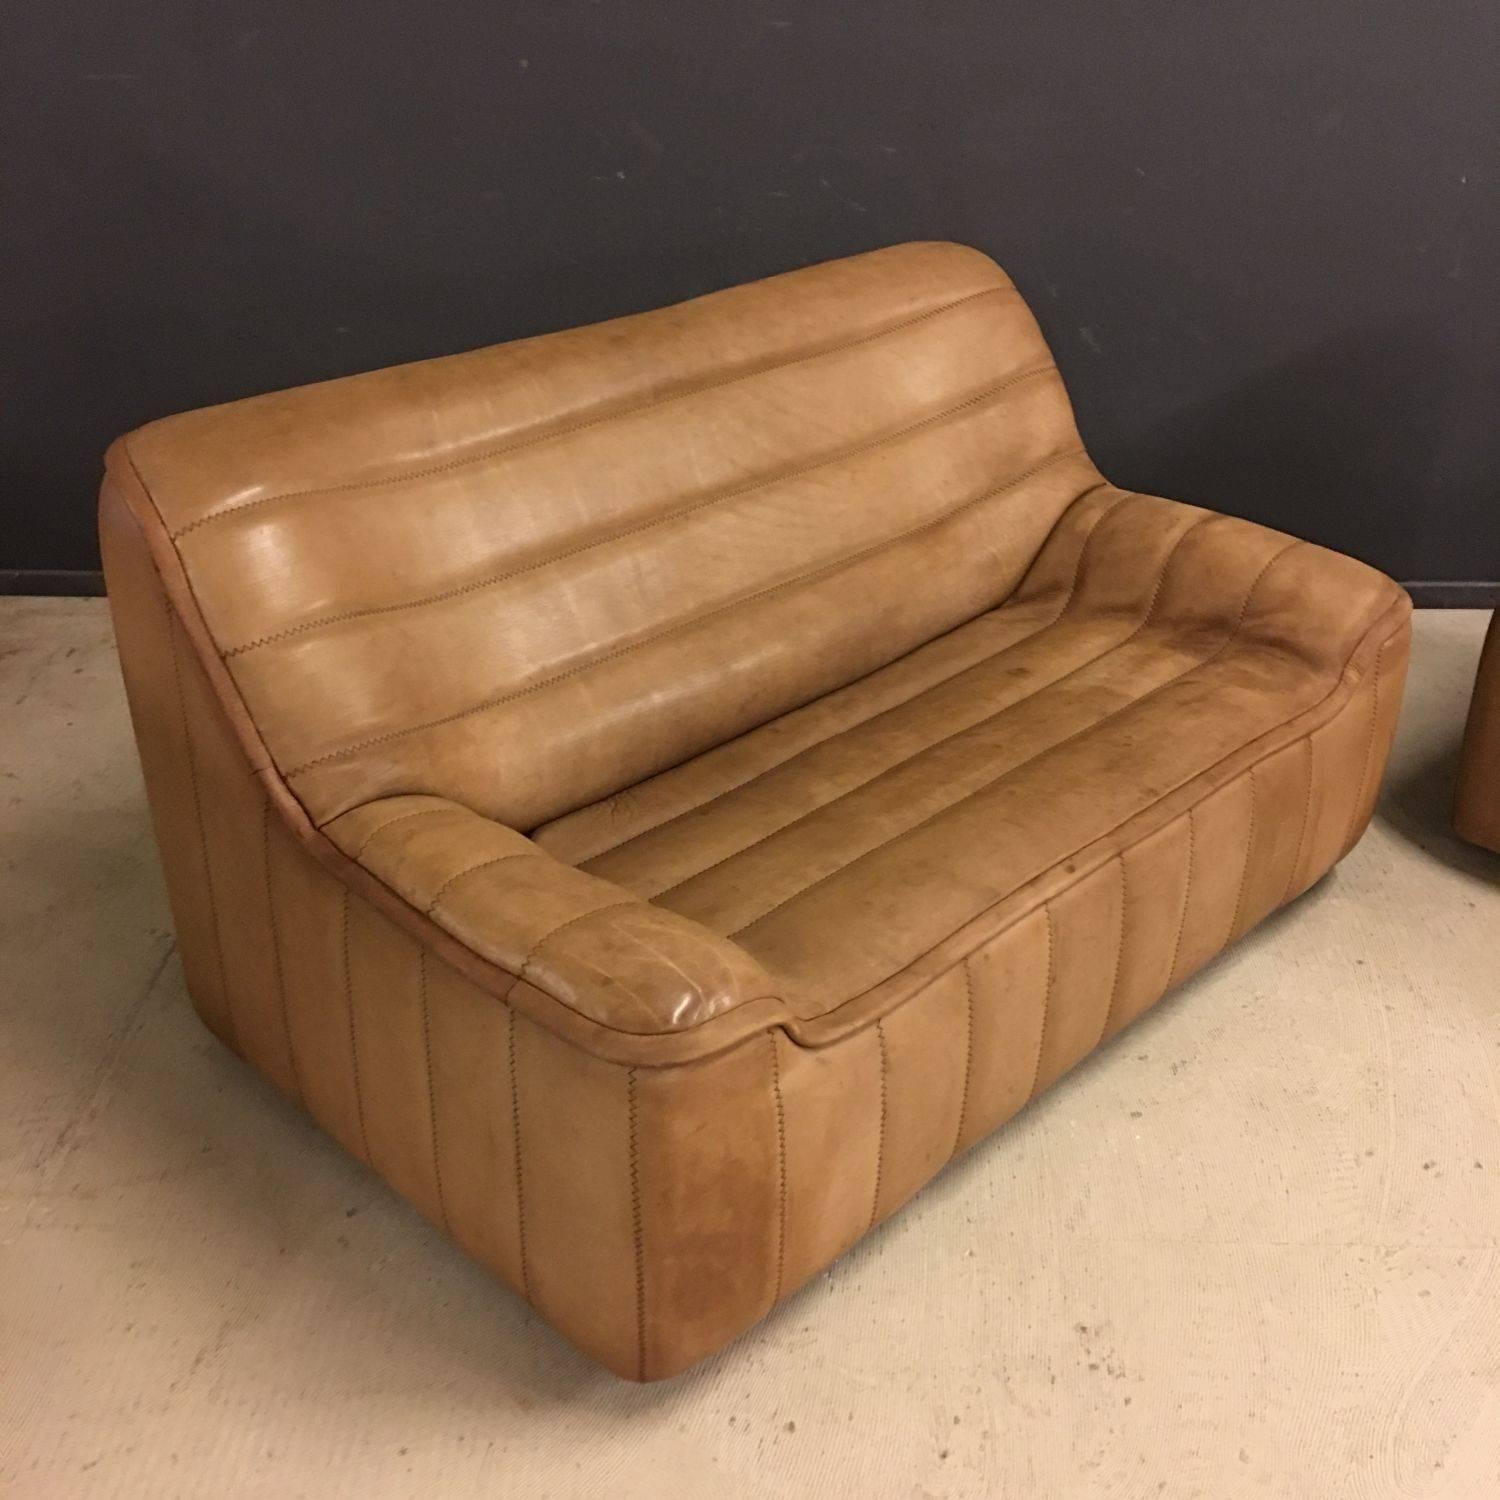 Beautiful set of two, DS84 two-seat sofas by De Sede. Made in thick, cognac collared, Buffalo leather with e a nice patina. Manufactured in Switzerland during the 1970s. Both remain in very good condition. Price for the set.